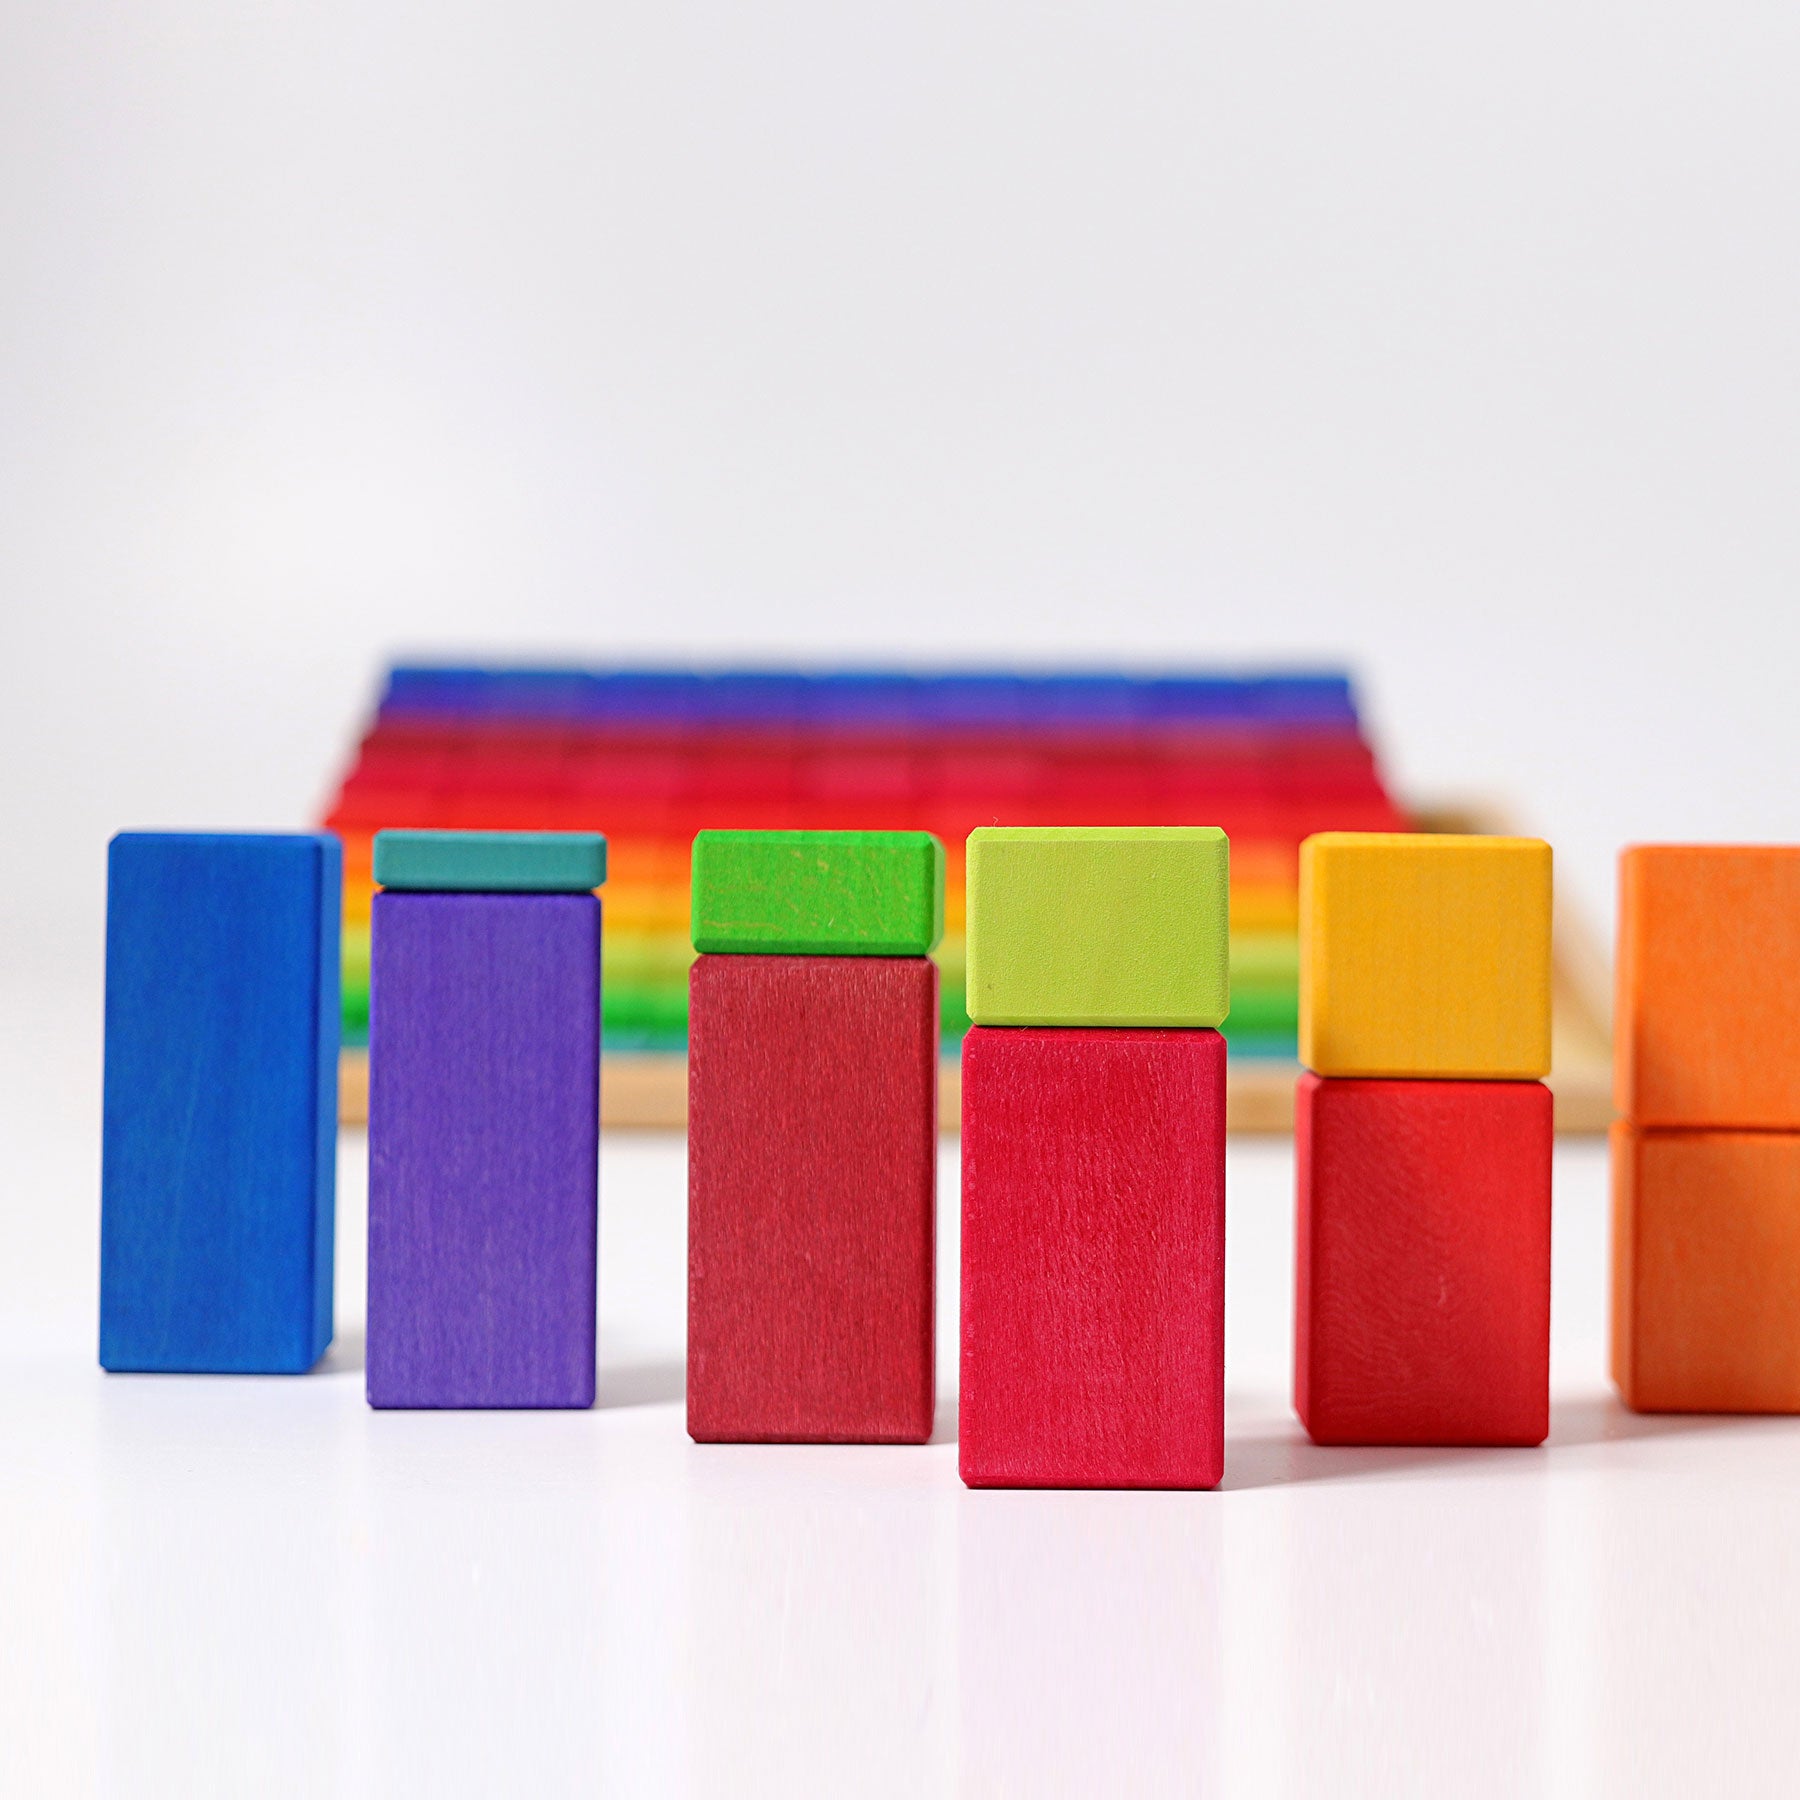 Grimm's Large Stepped Counting Blocks - Bueno Blocks